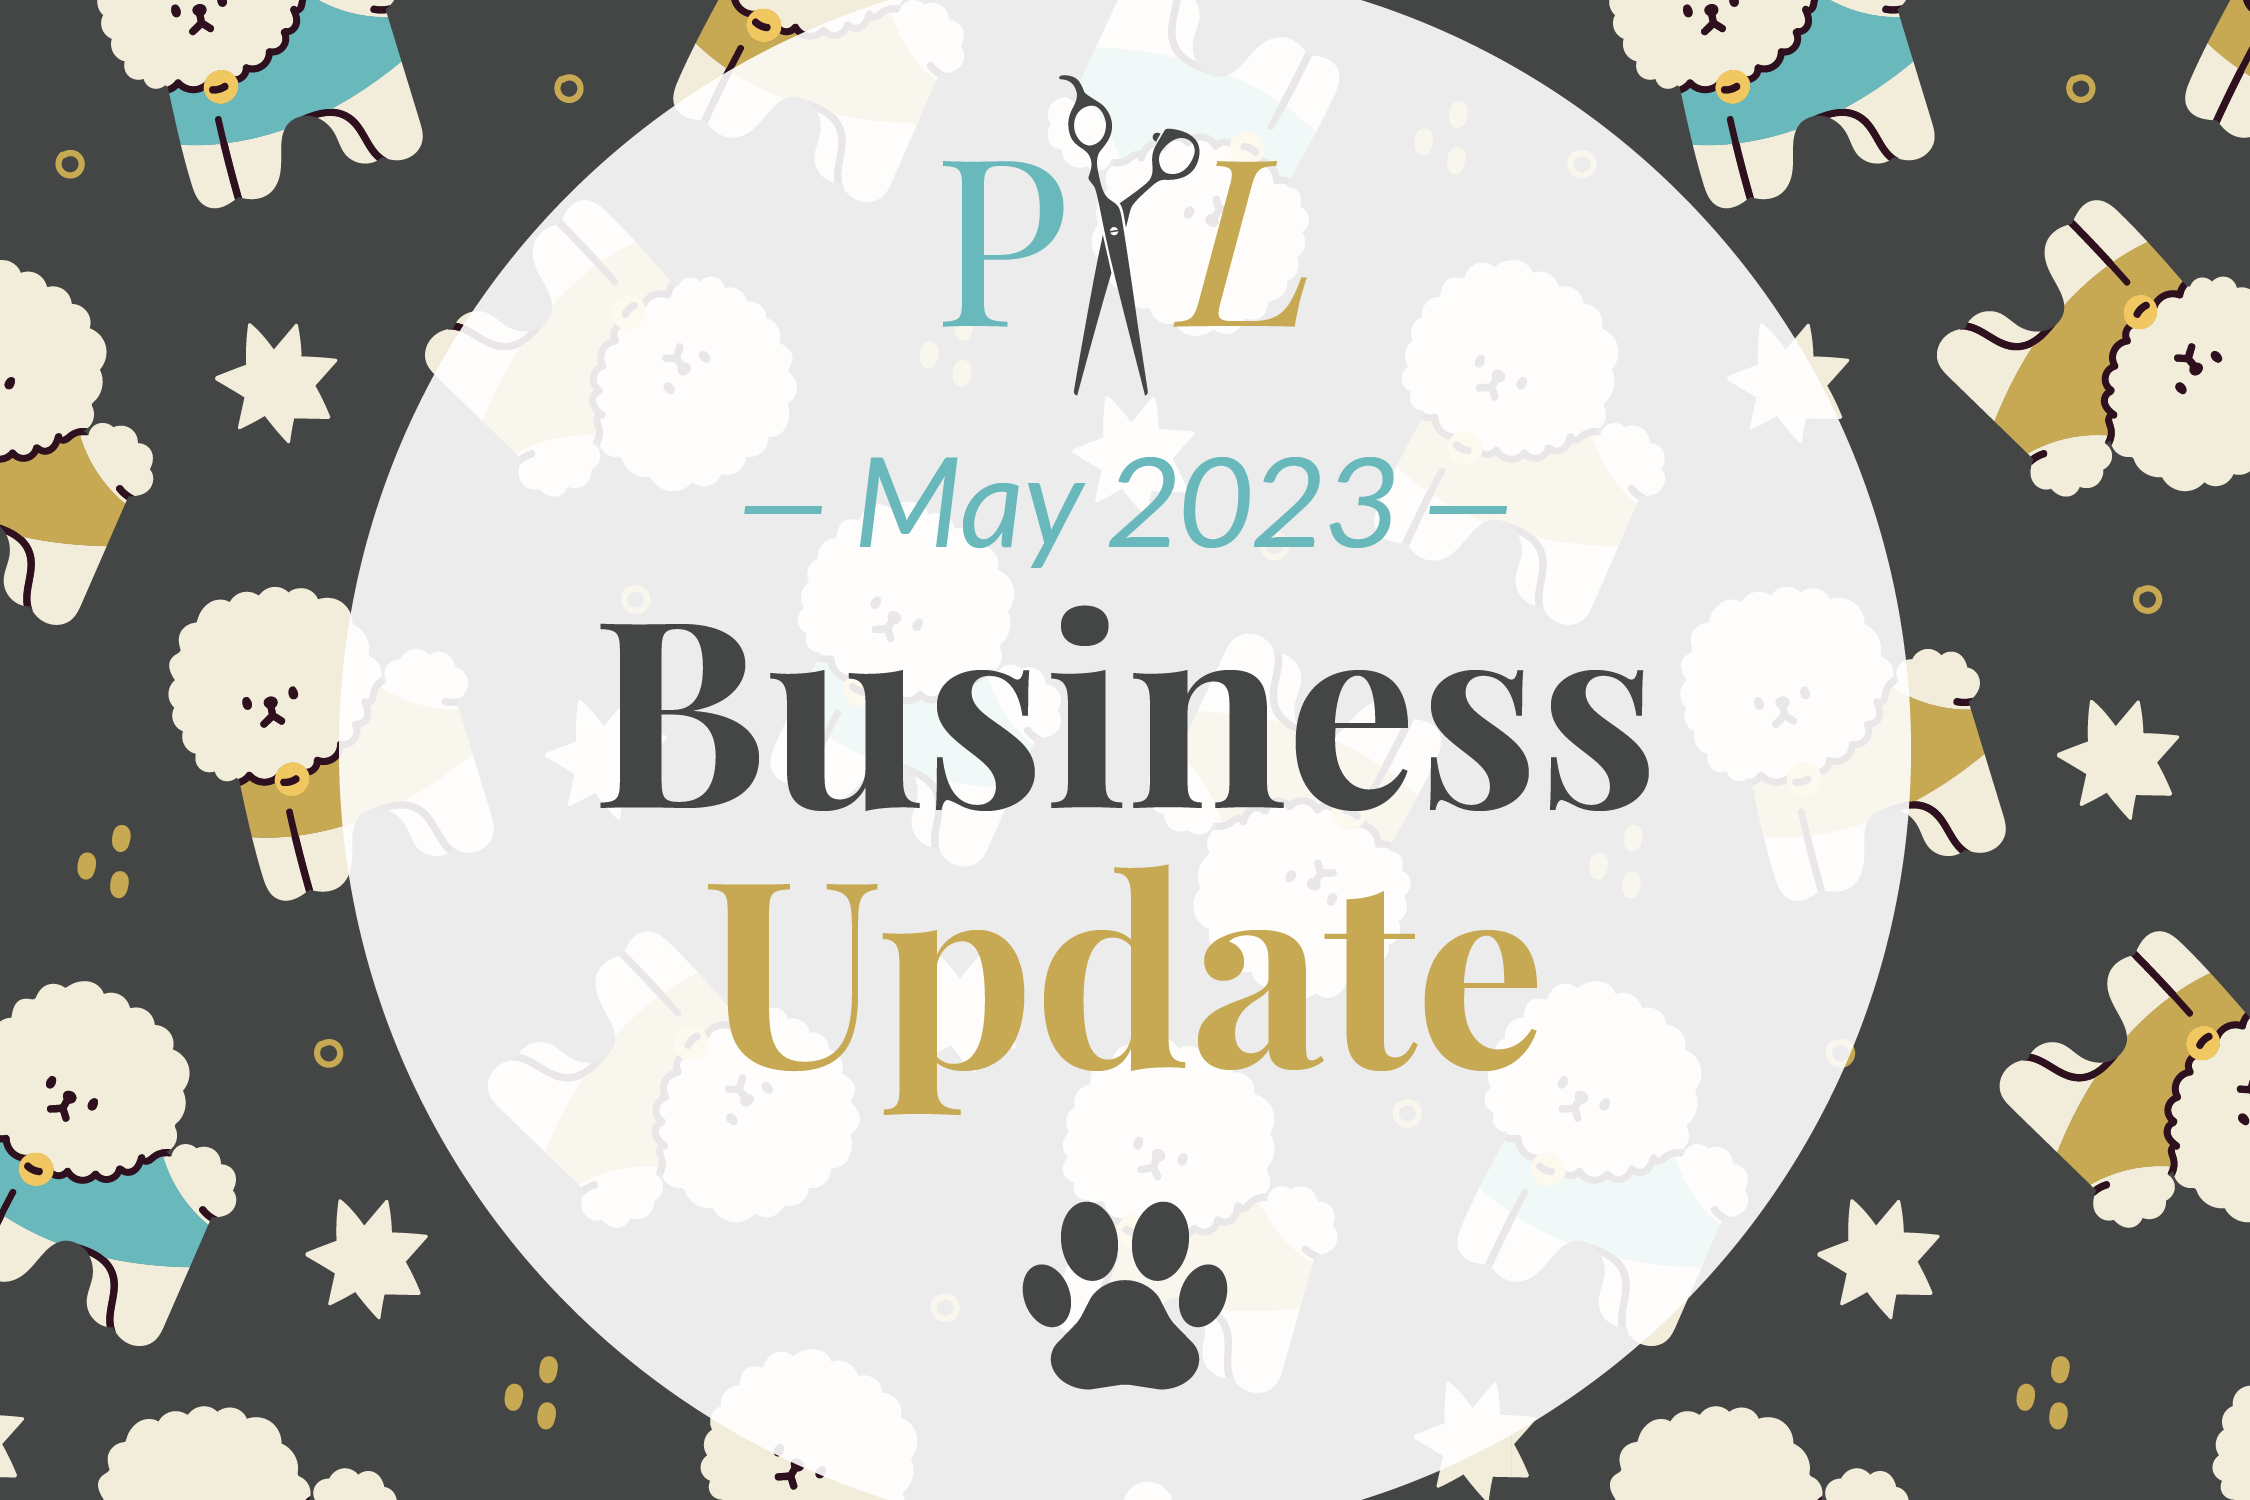 Featured image for “May 2023 Business Update”